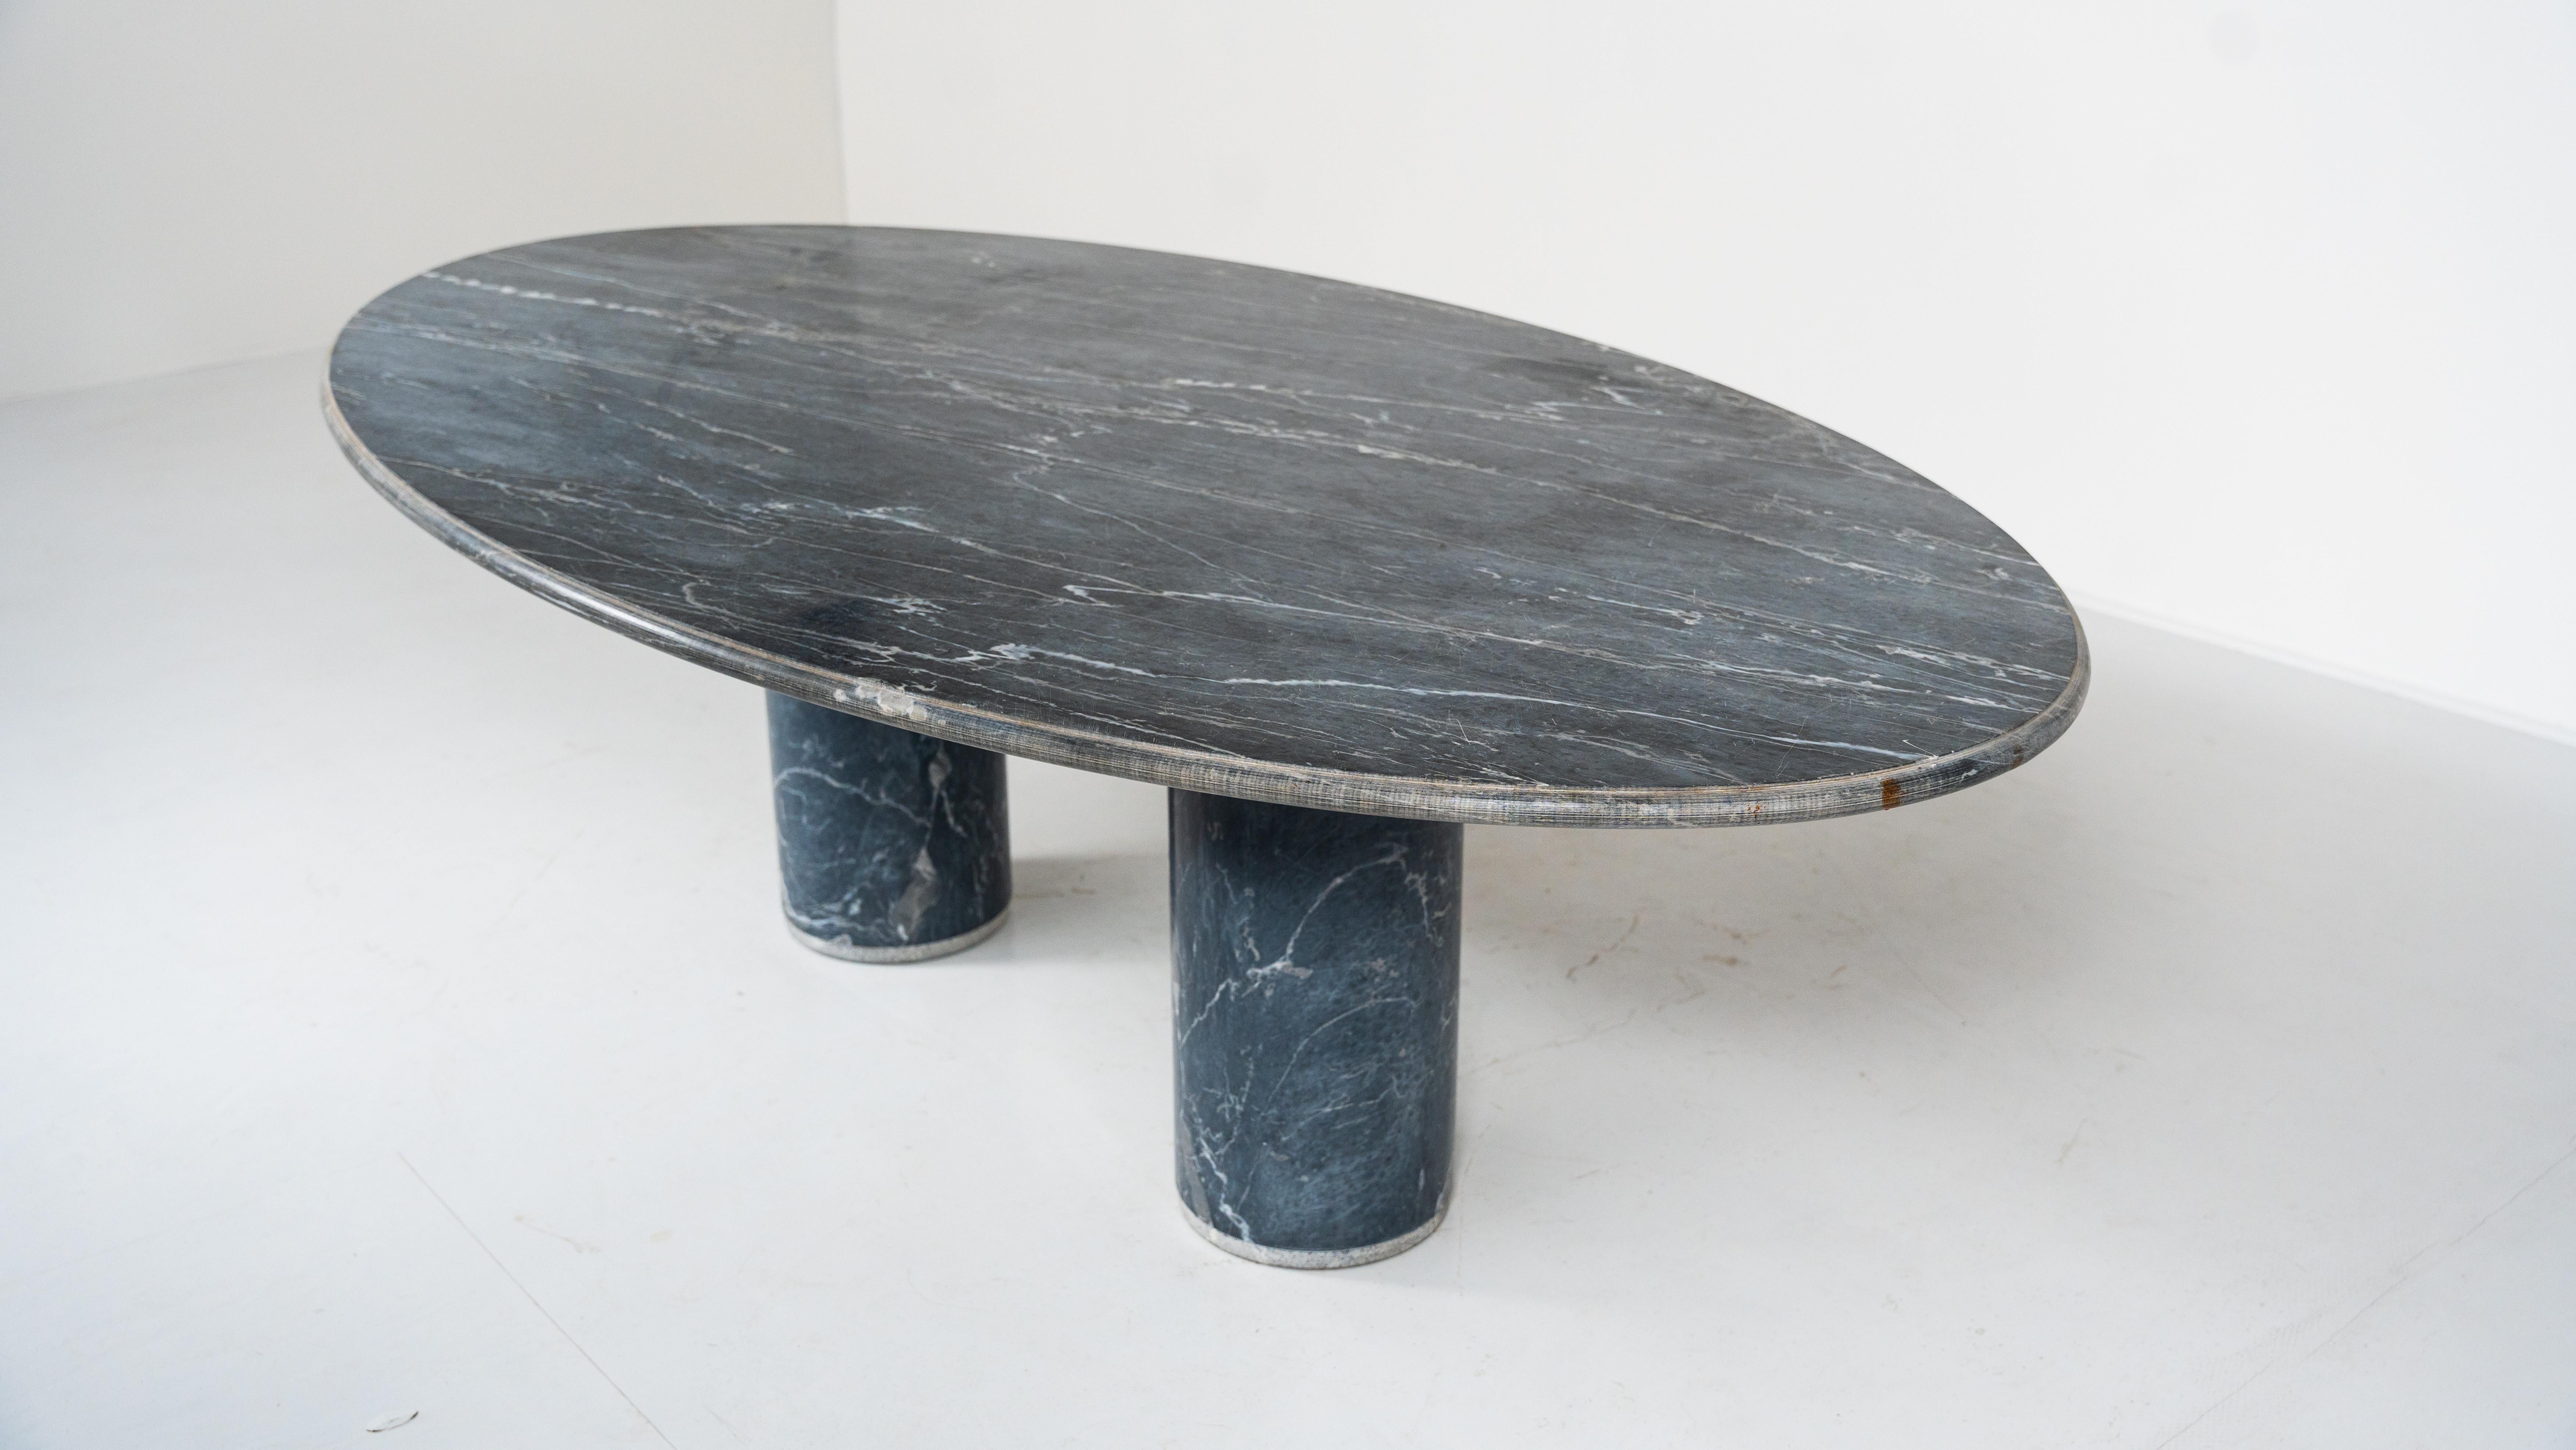 Ovale del Giardiniere Table by Achille Castiglioni for Upgroup, Marble, 1980s For Sale 8